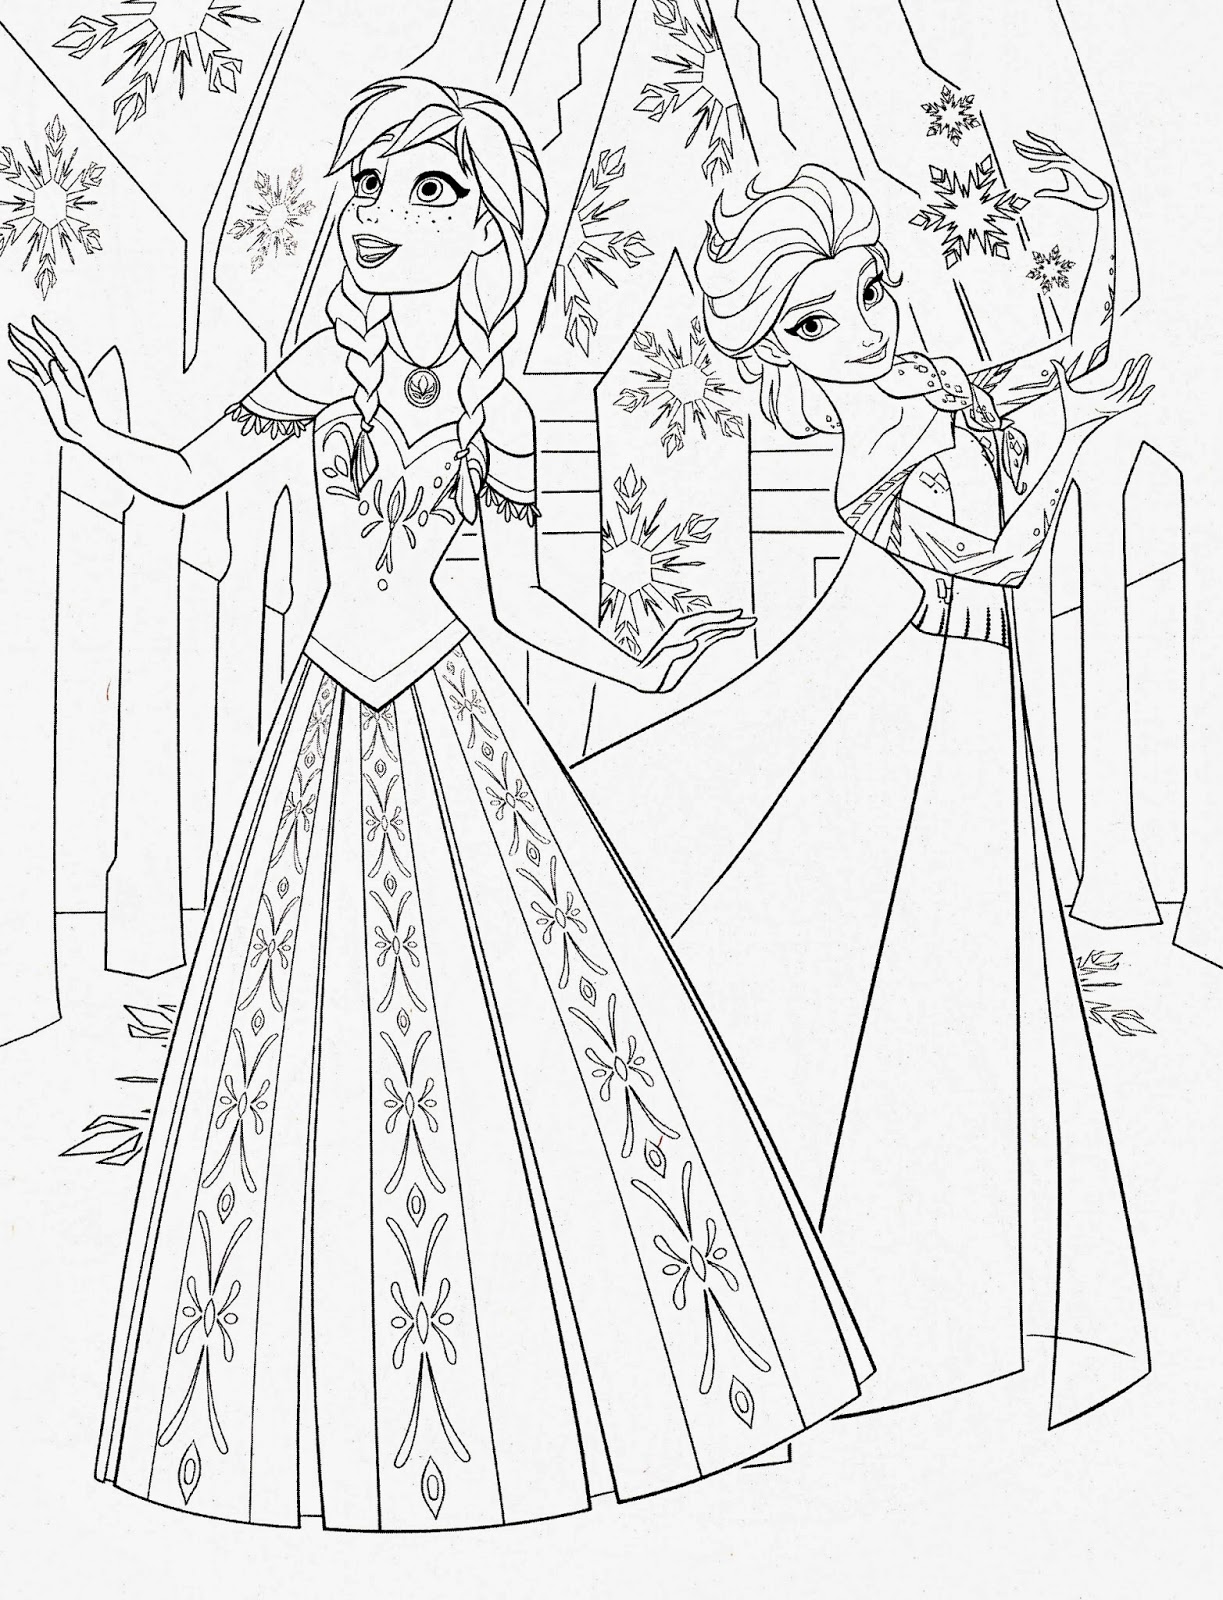  Frozen Coloring Pages | Color pages | FREE coloring pages for kids |Printable coloring pages for kids| #40